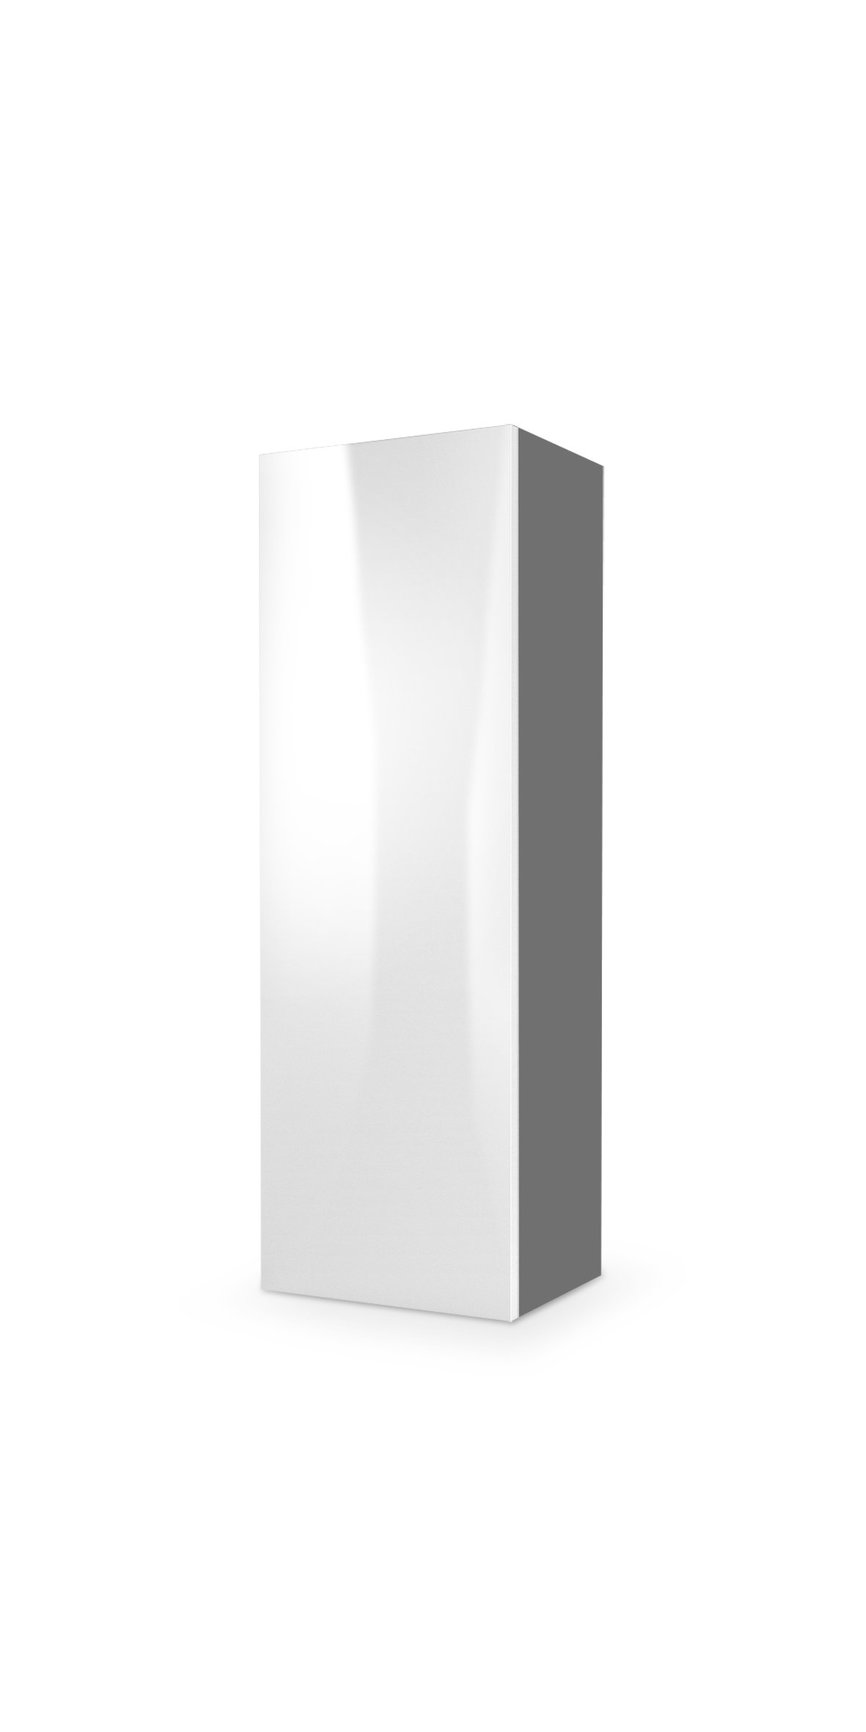 LIVO S-120 hanging cabinet, color: grey / white